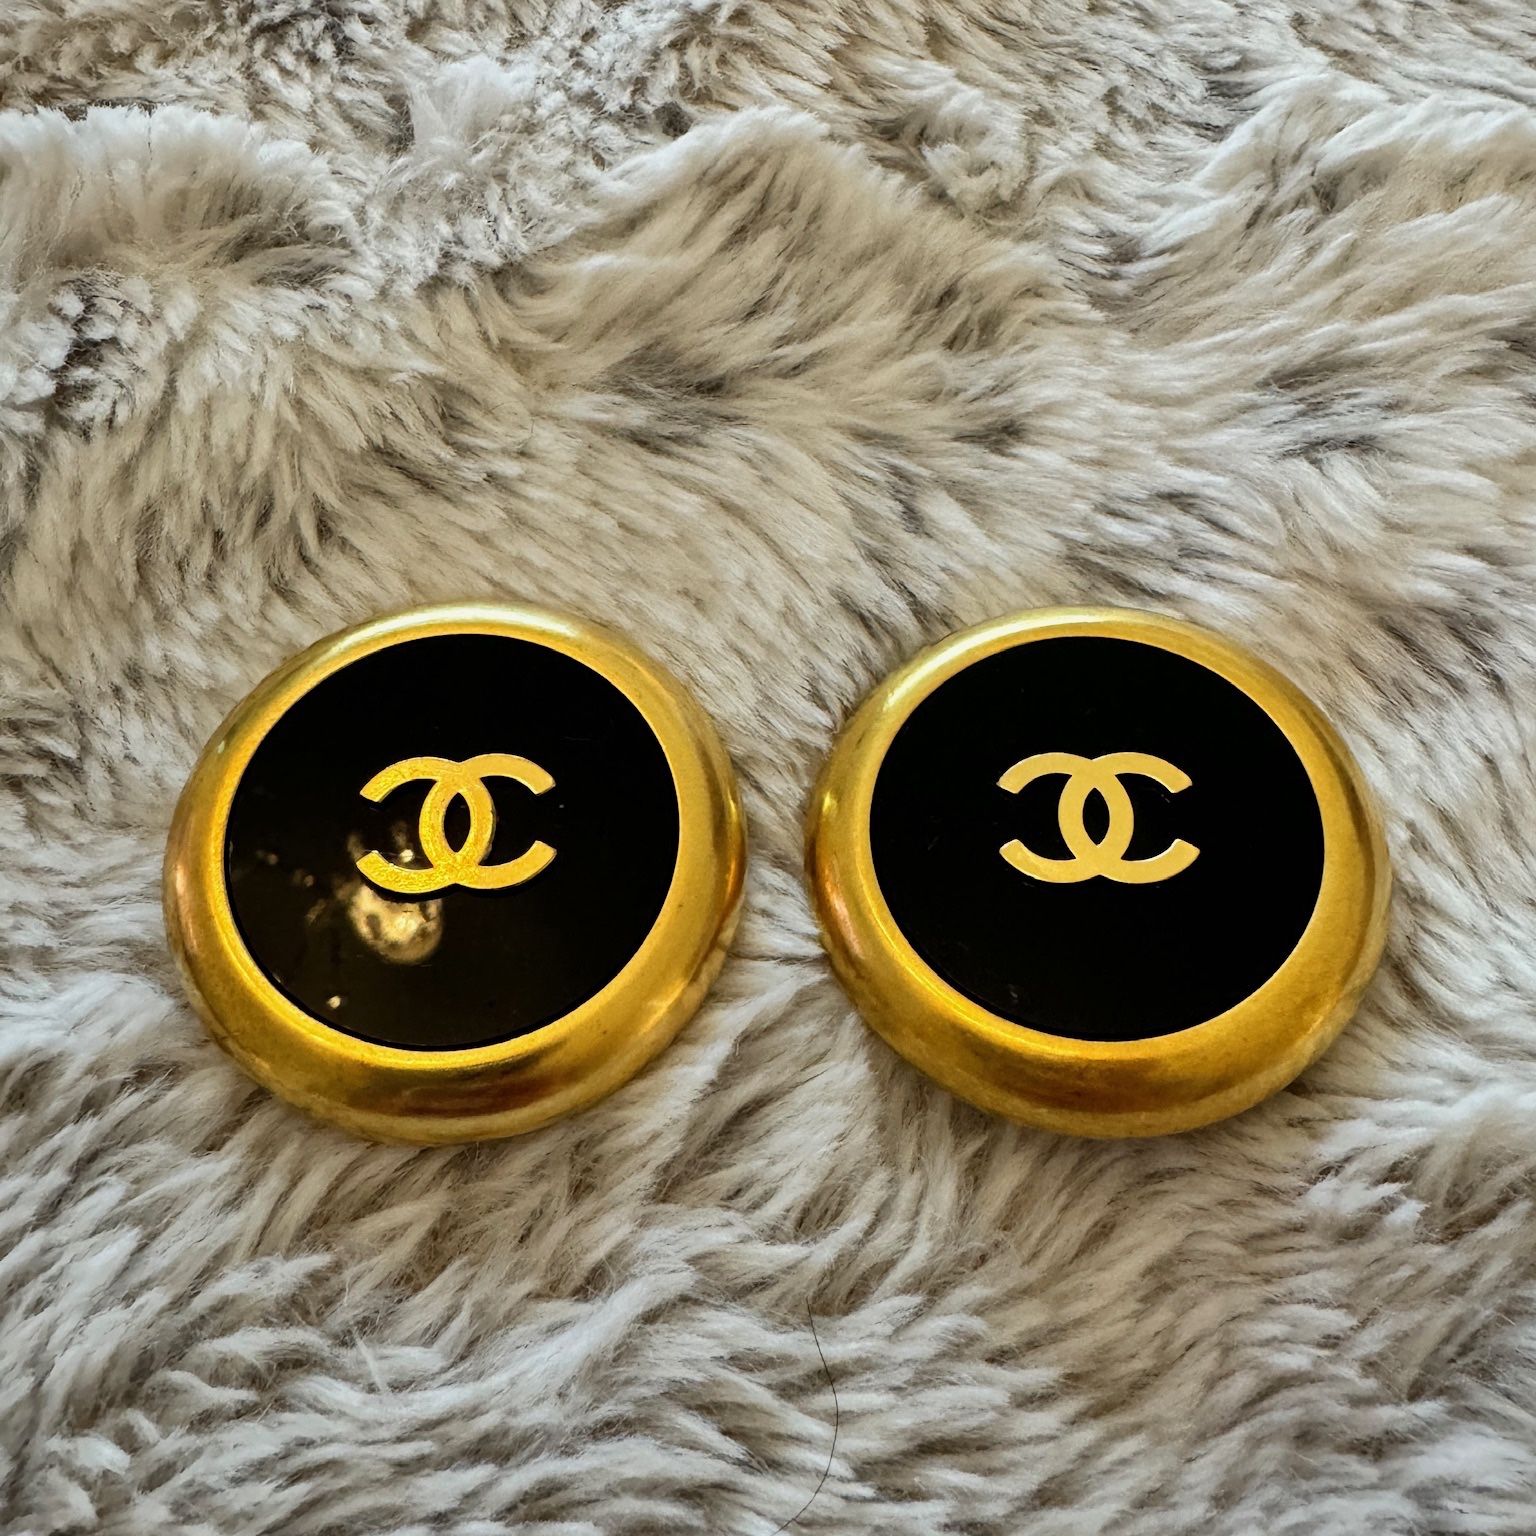 1992 Chanel Large Black And Golden Round Logo Earrings 